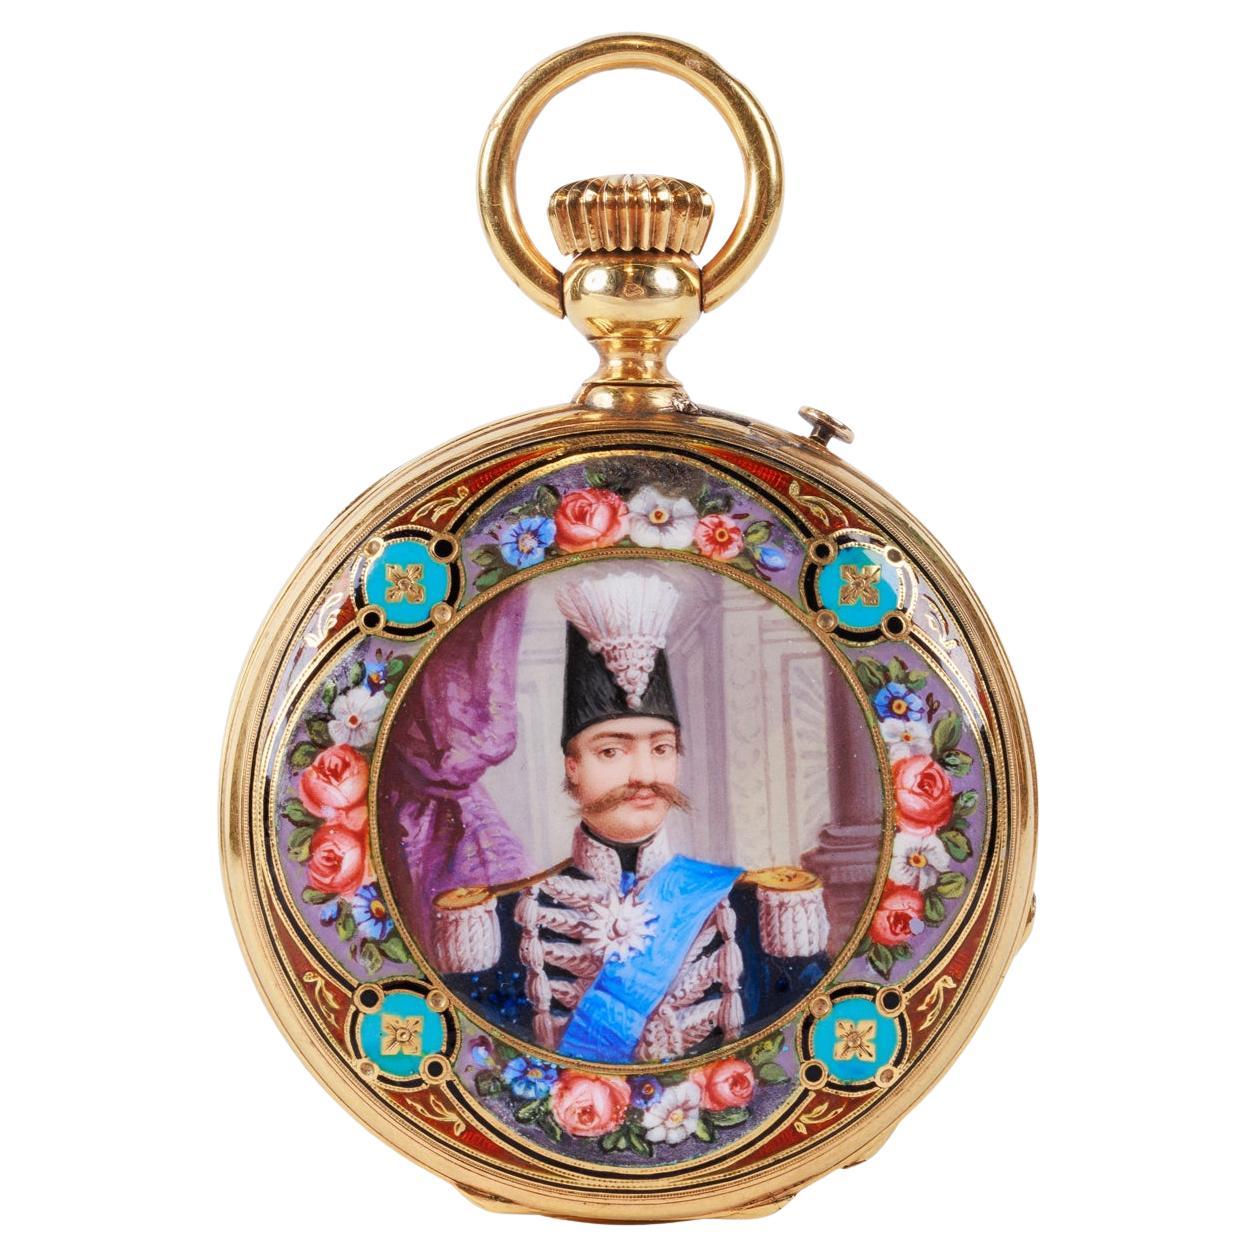 Rare Gold and Enamel Presentation Pocket Watch with Portrait of Naser Shah For Sale